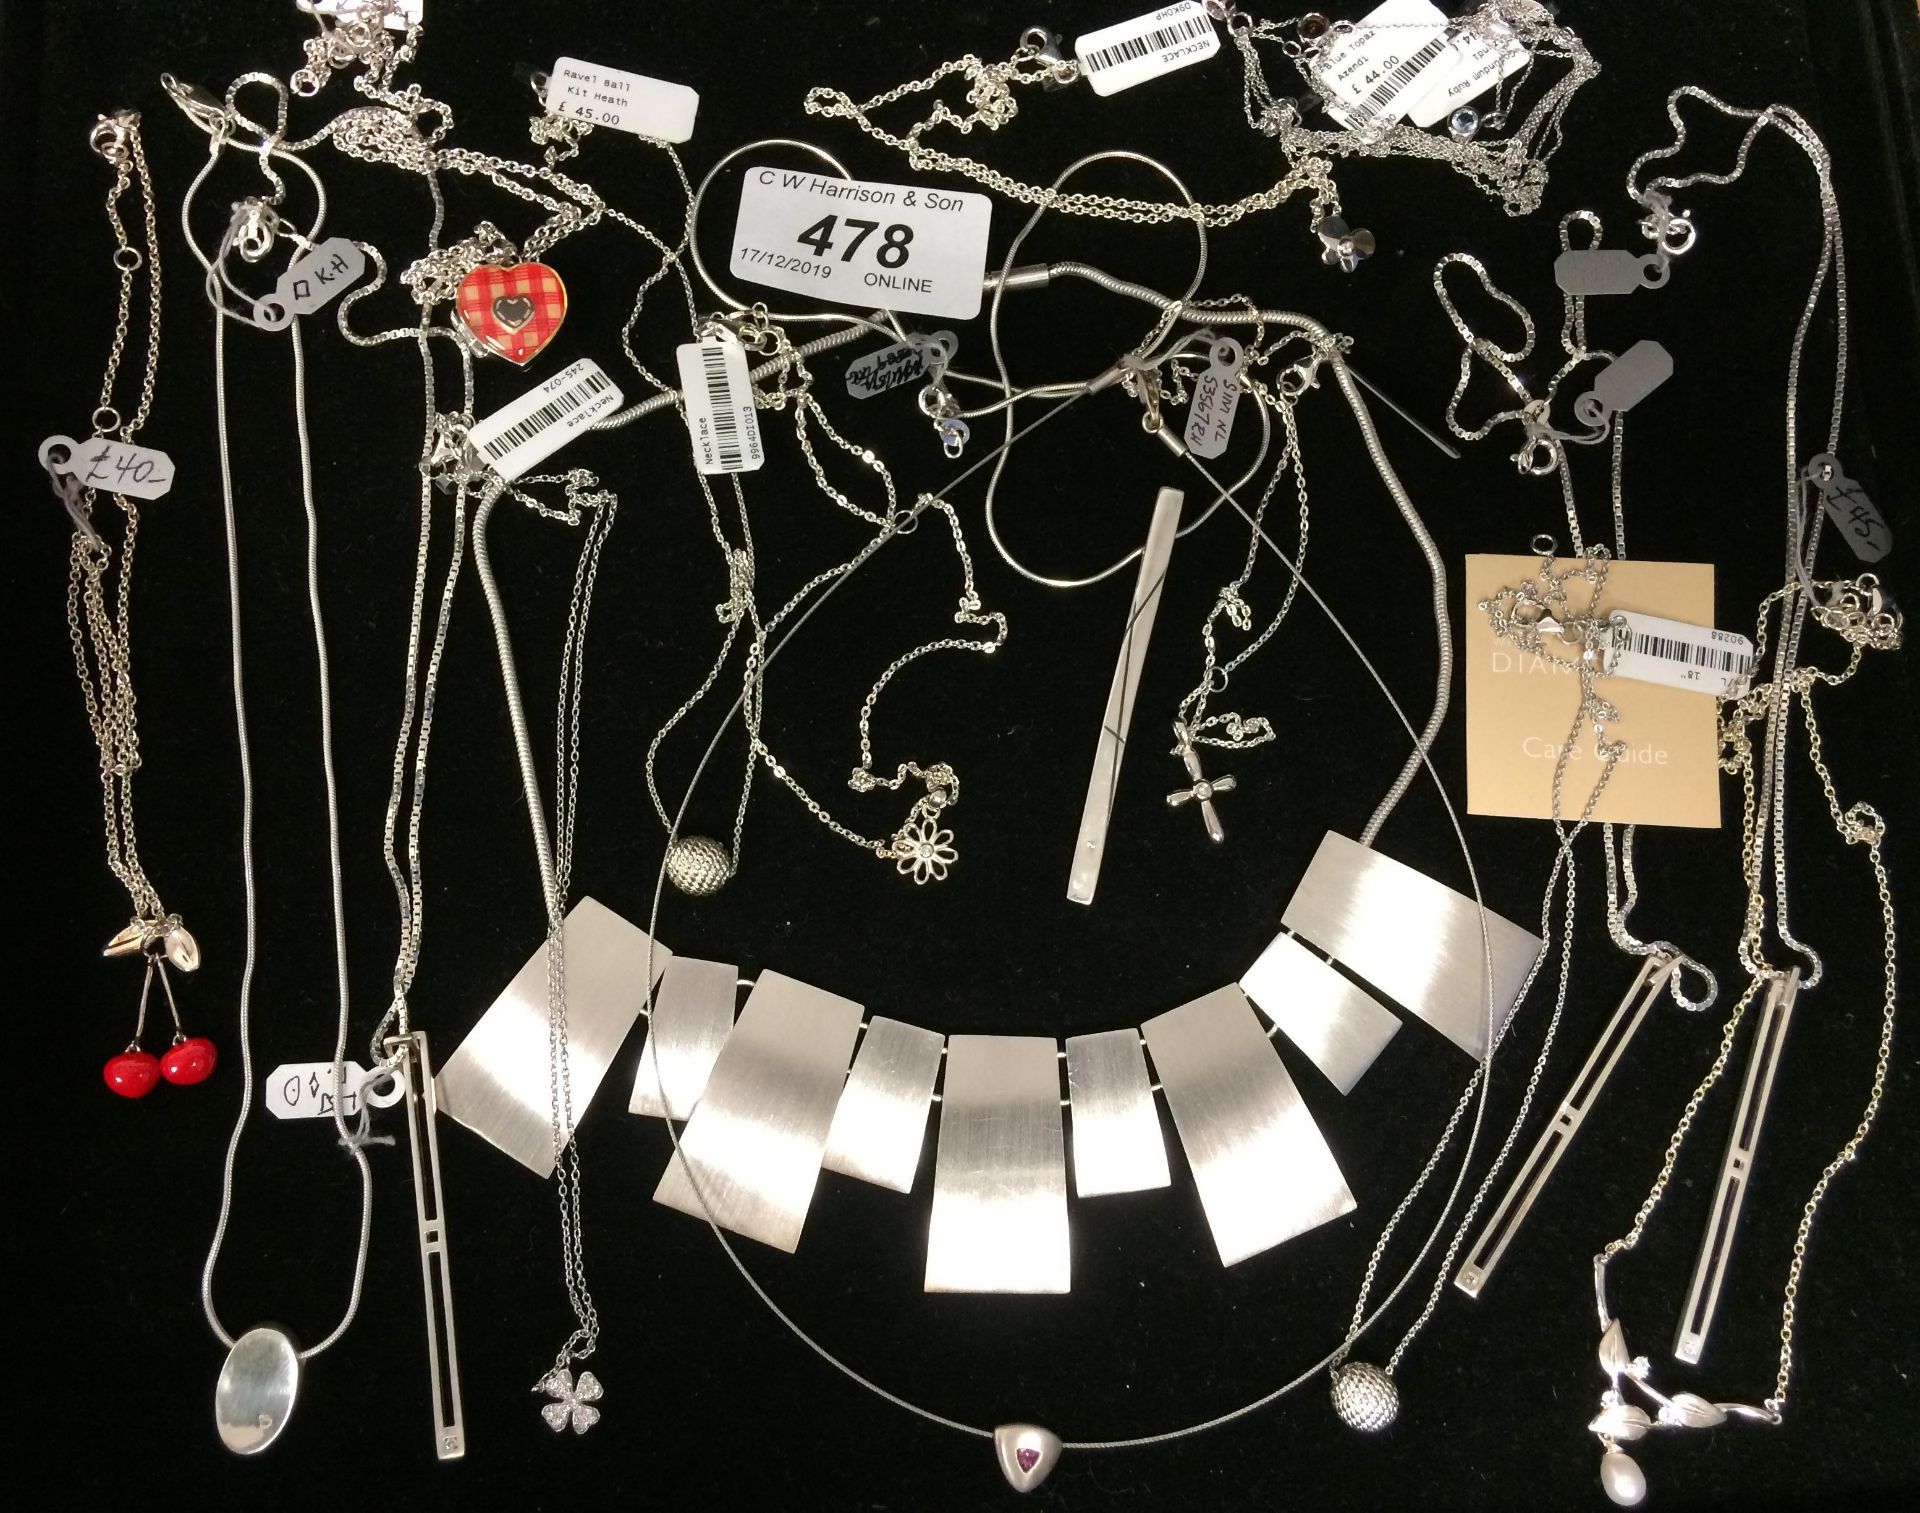 19 x 925 sterling silver necklaces RRP £40-£50 each (please note this lot is subject to VAT)